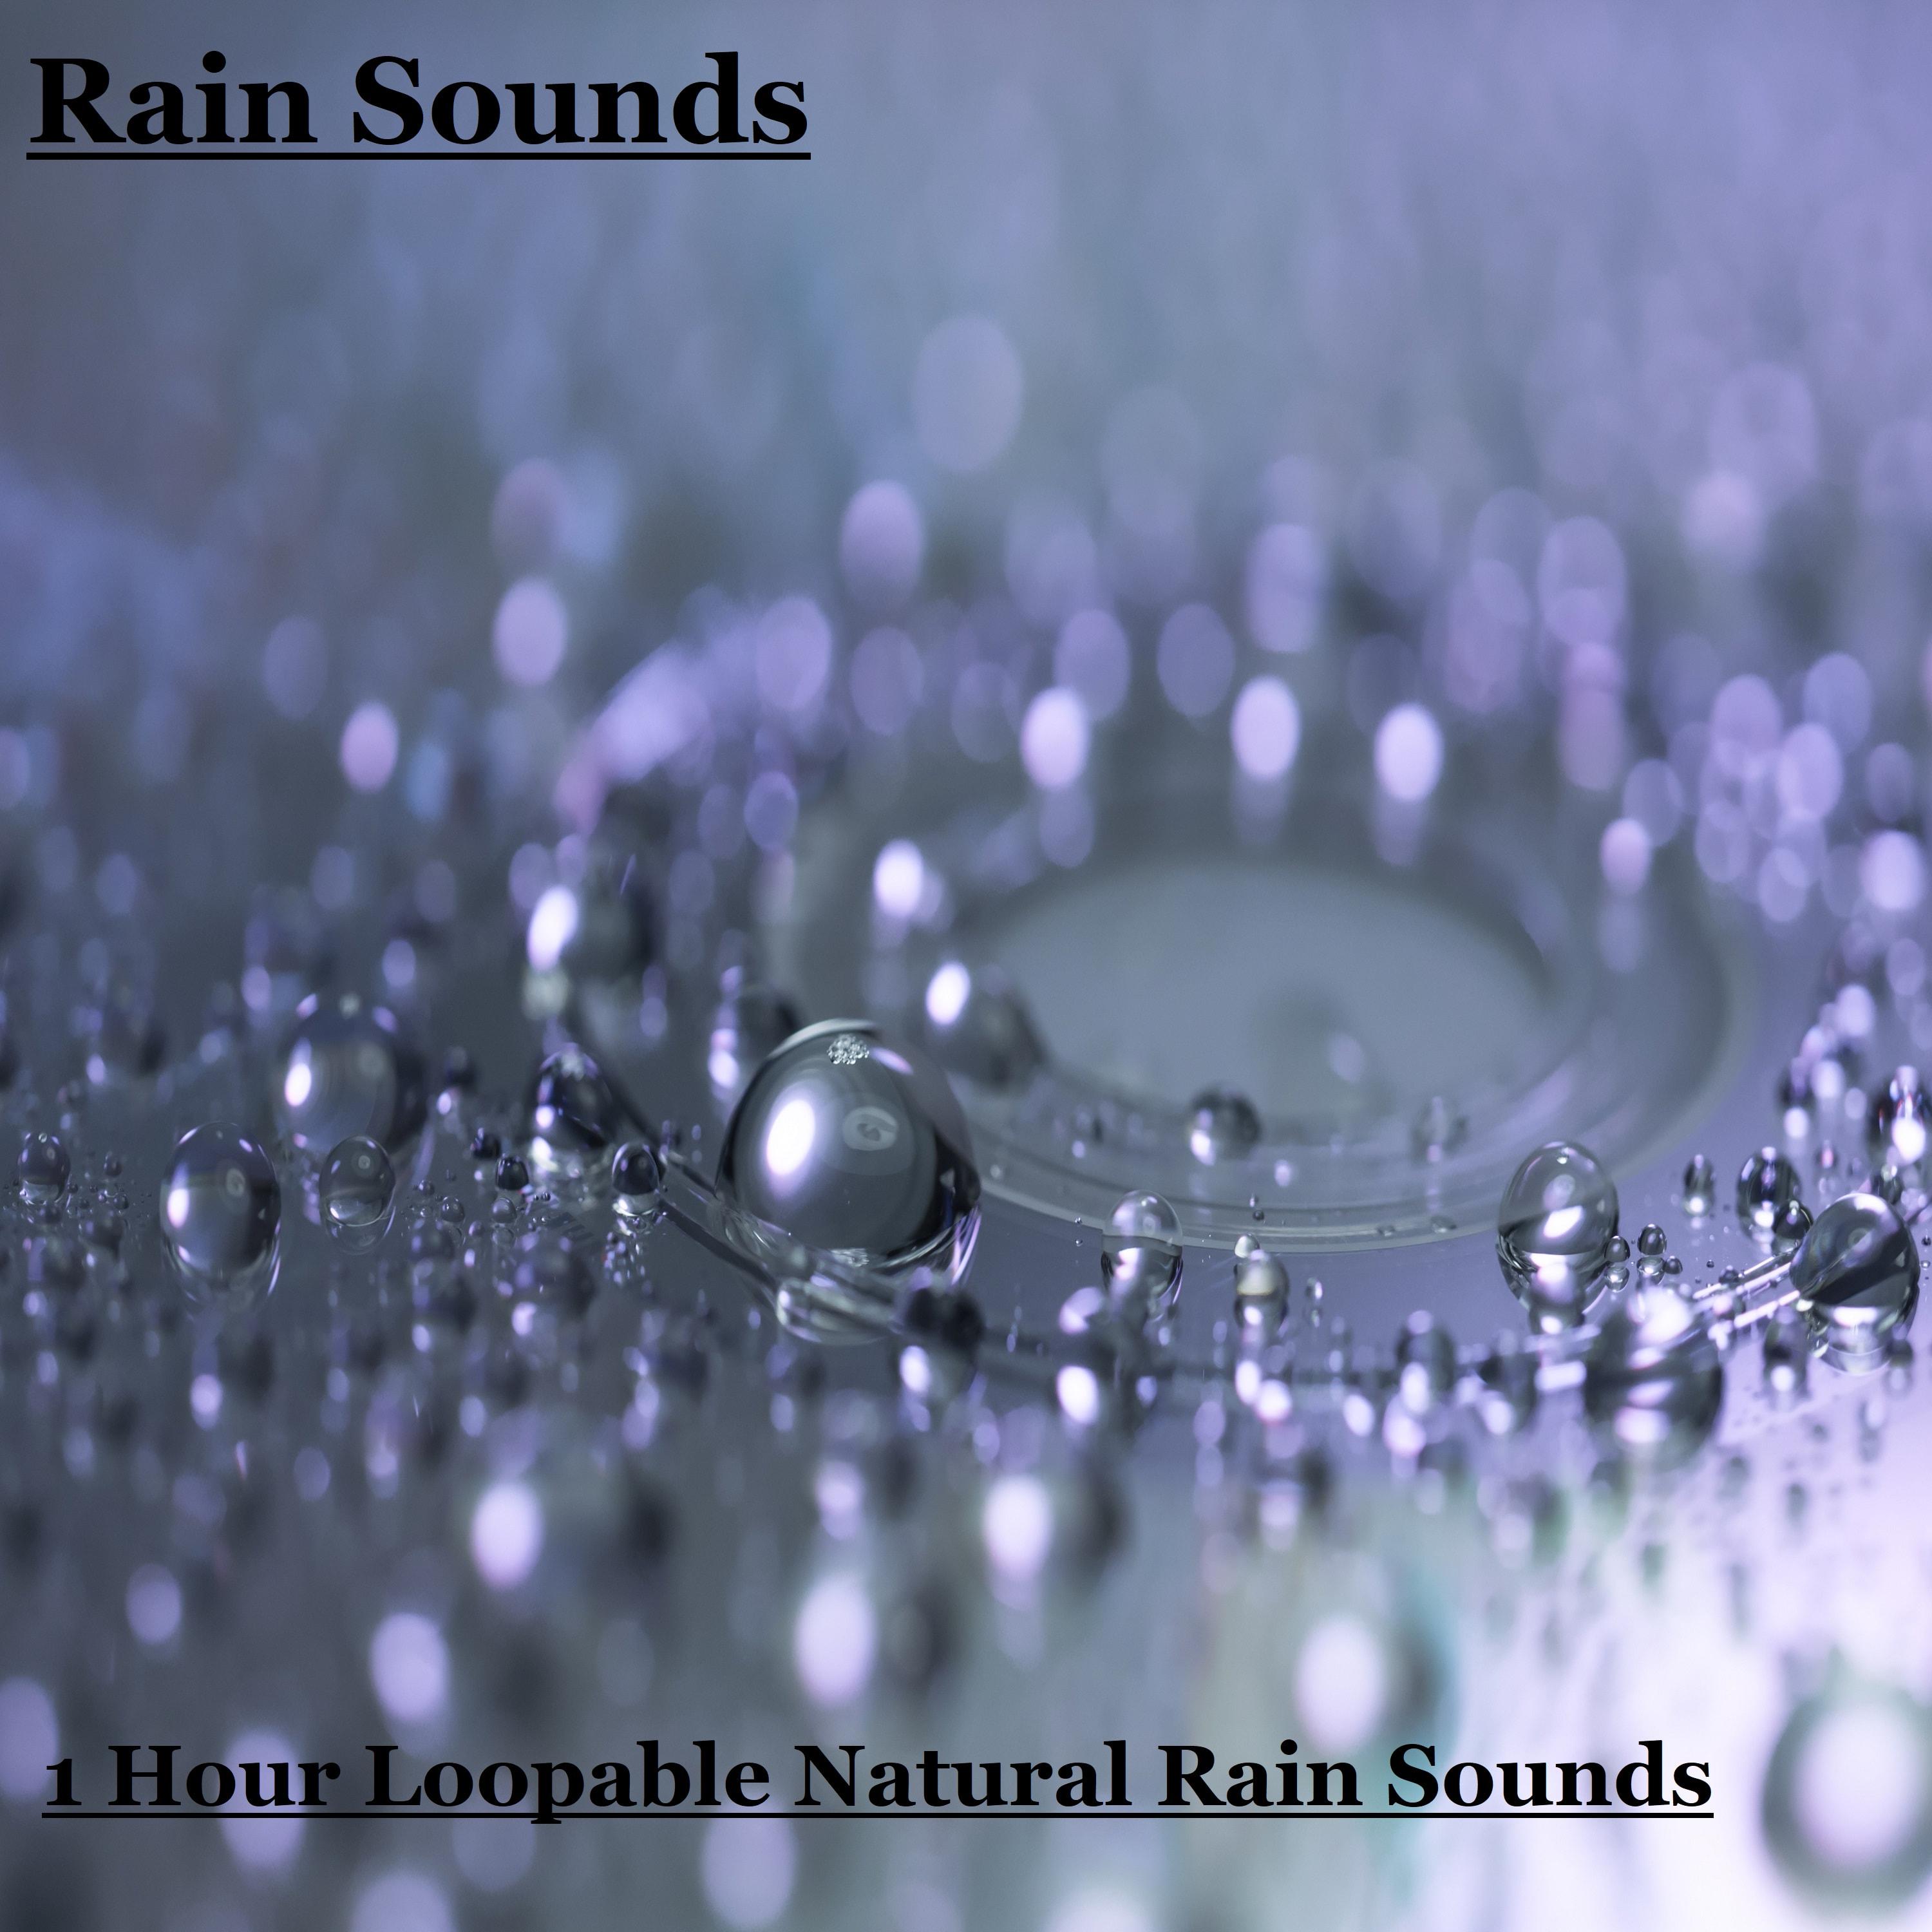 1 Hour Loopable Natural Rain Sounds